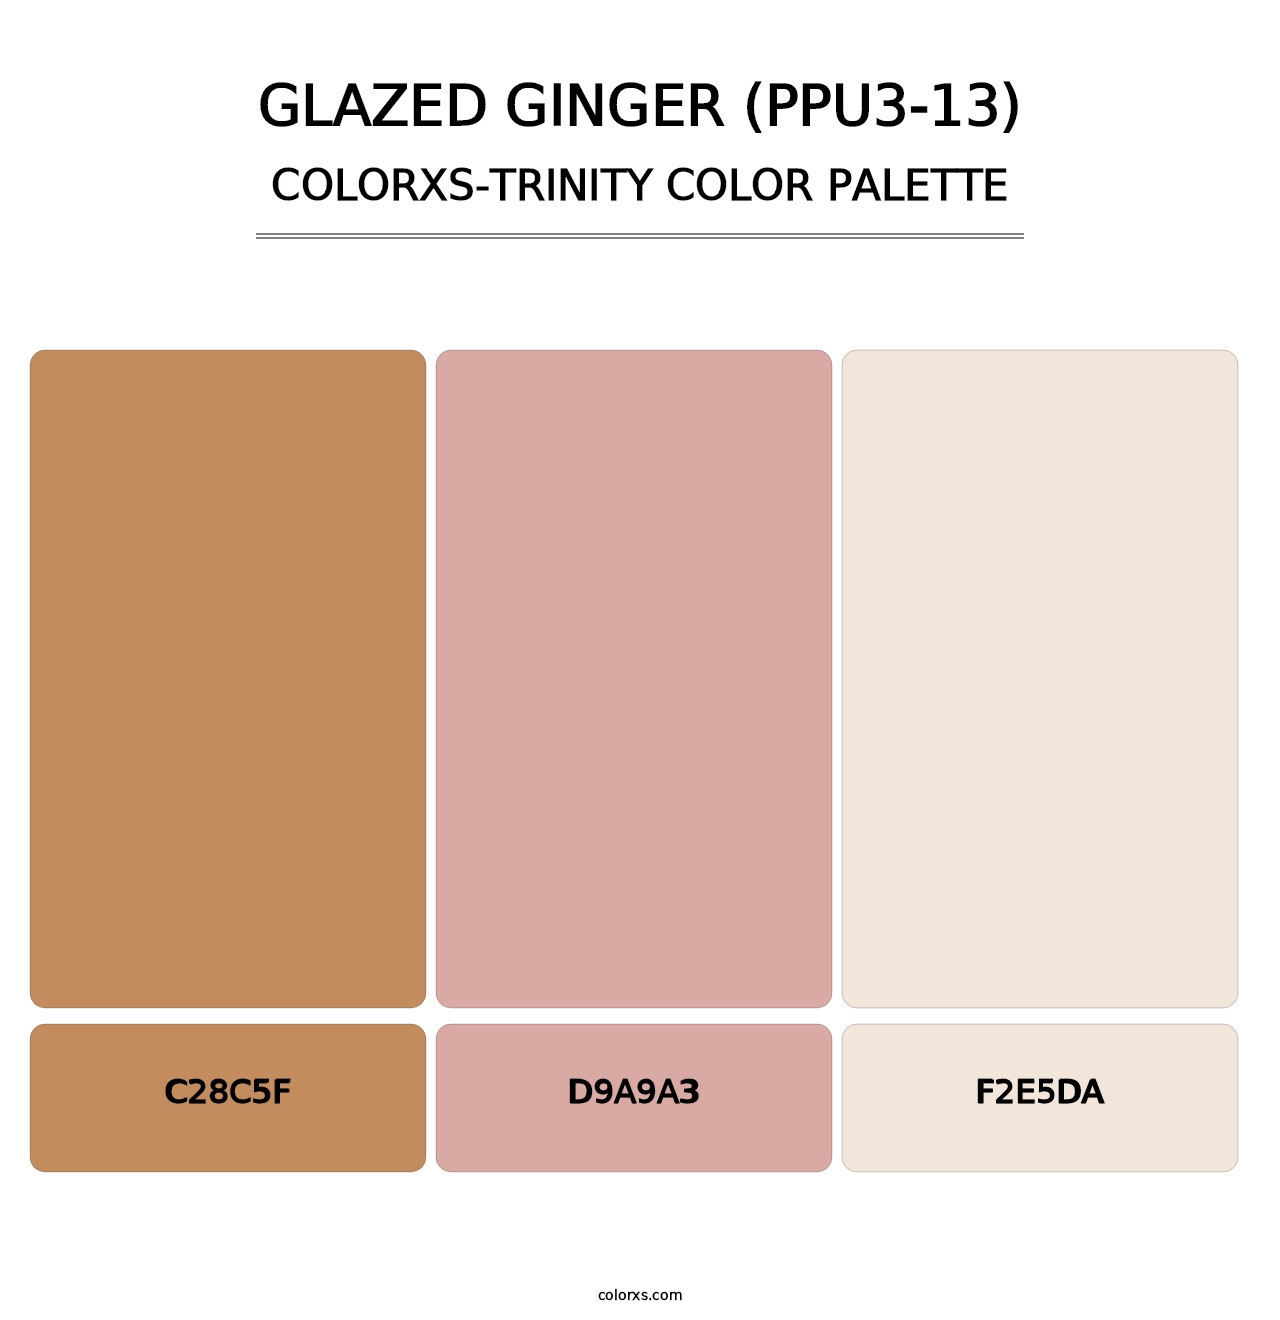 Glazed Ginger (PPU3-13) - Colorxs Trinity Palette